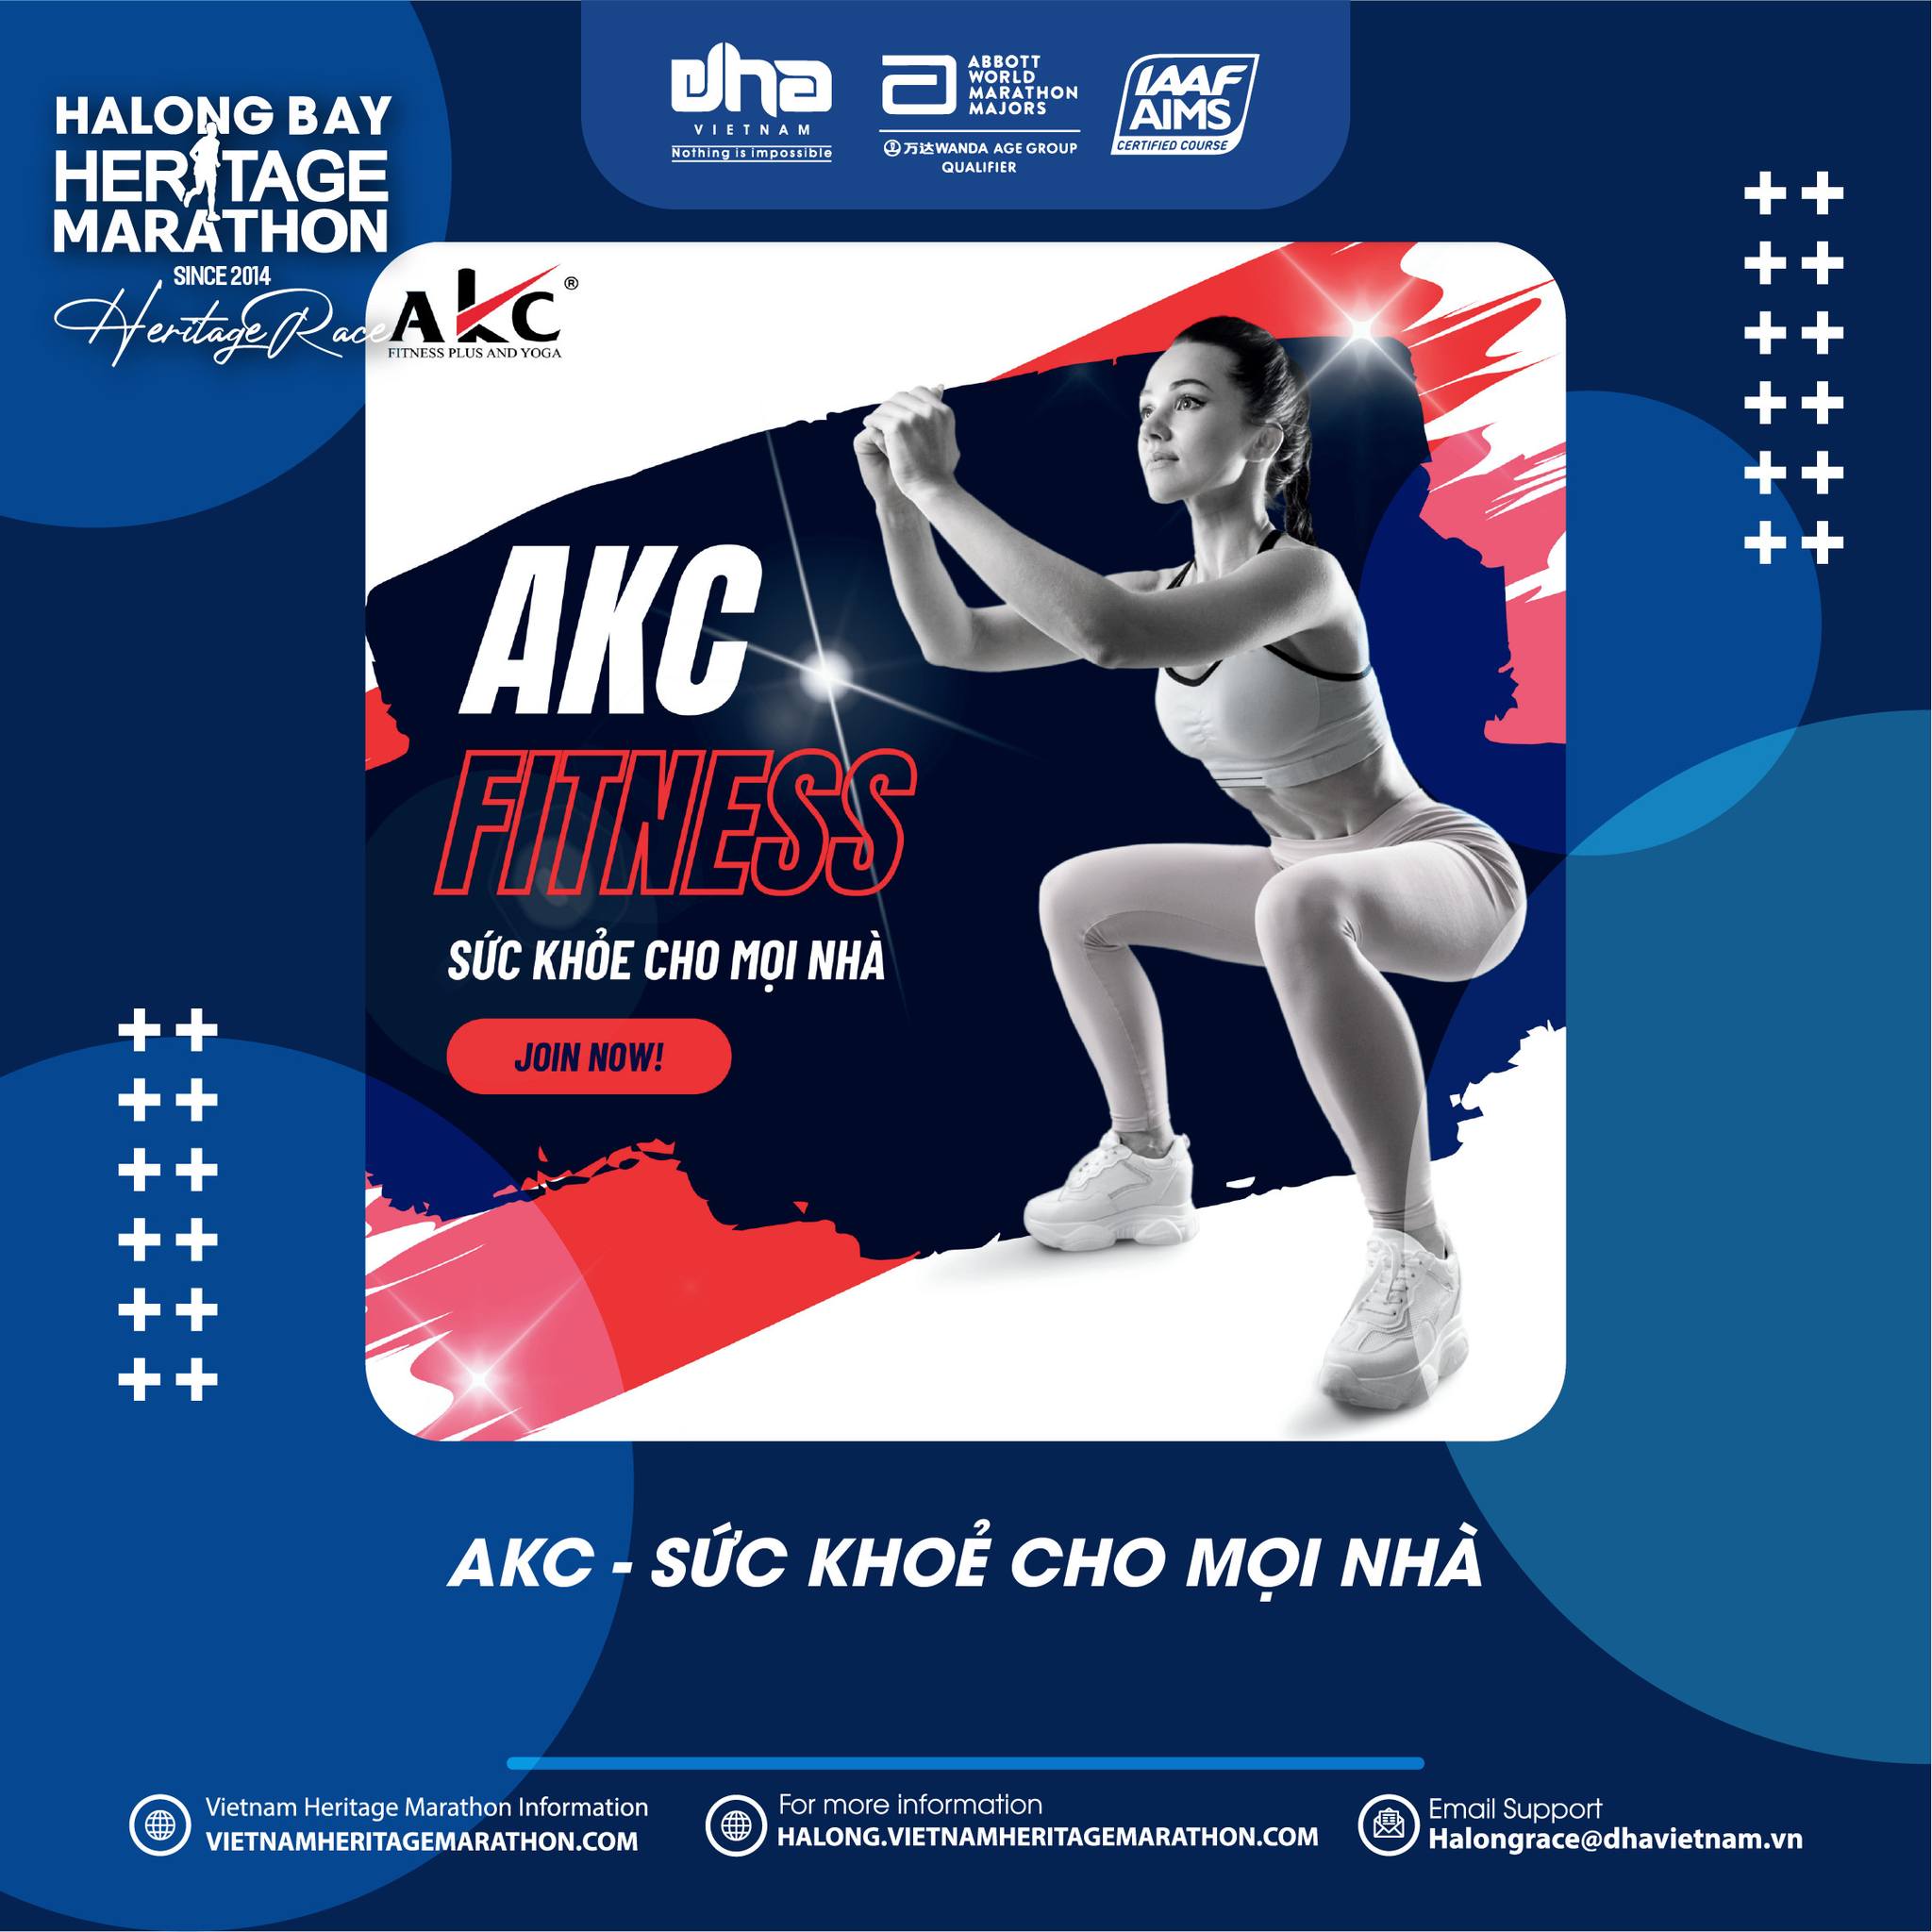 HALONG BAY HERITAGE MARATHON: INCENTIVES FROM AKC FITNESS